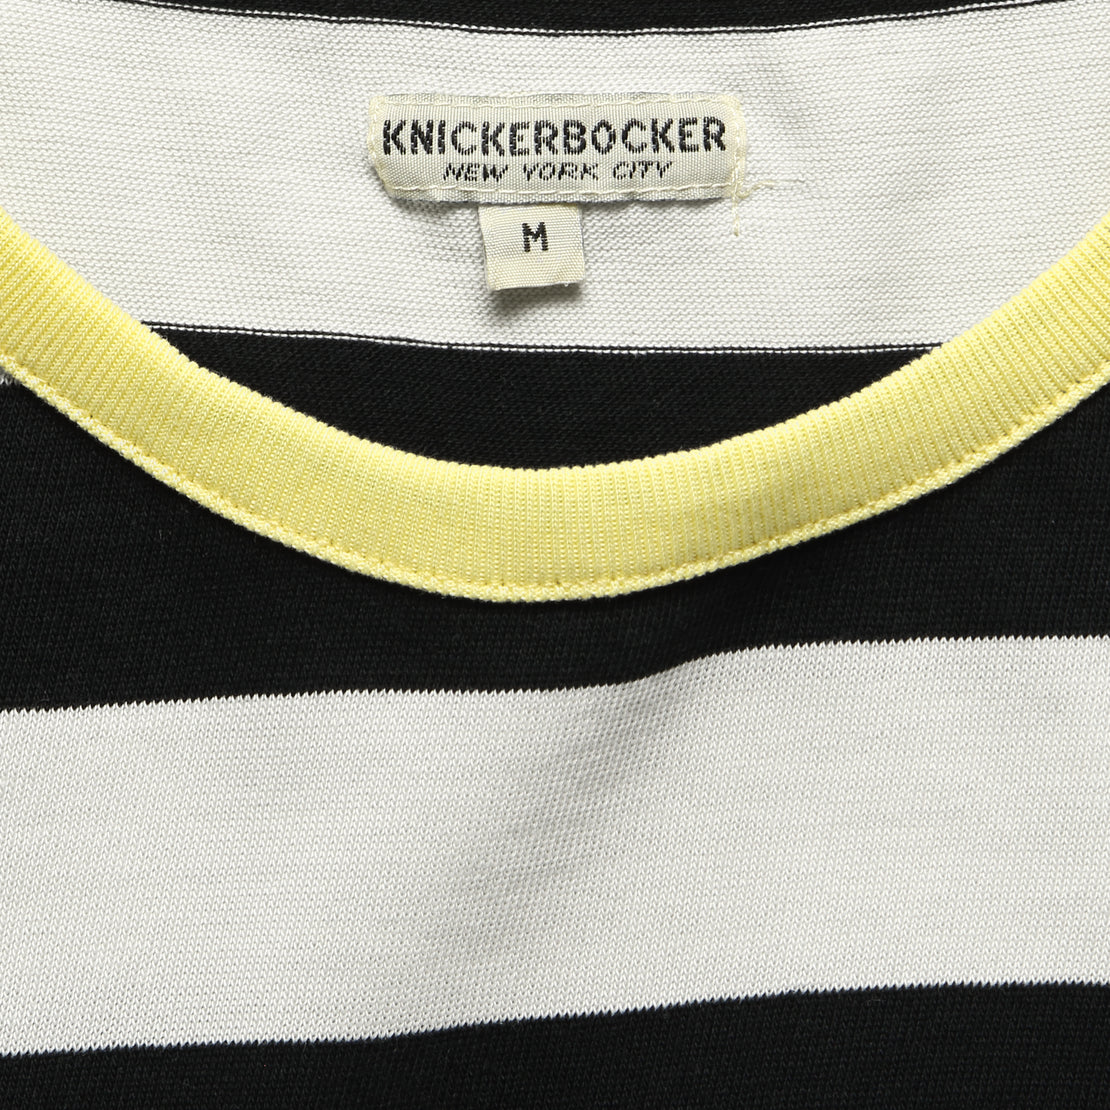 Mojave Striped Tee - Black/White - Knickerbocker - STAG Provisions - Tops - S/S Tee